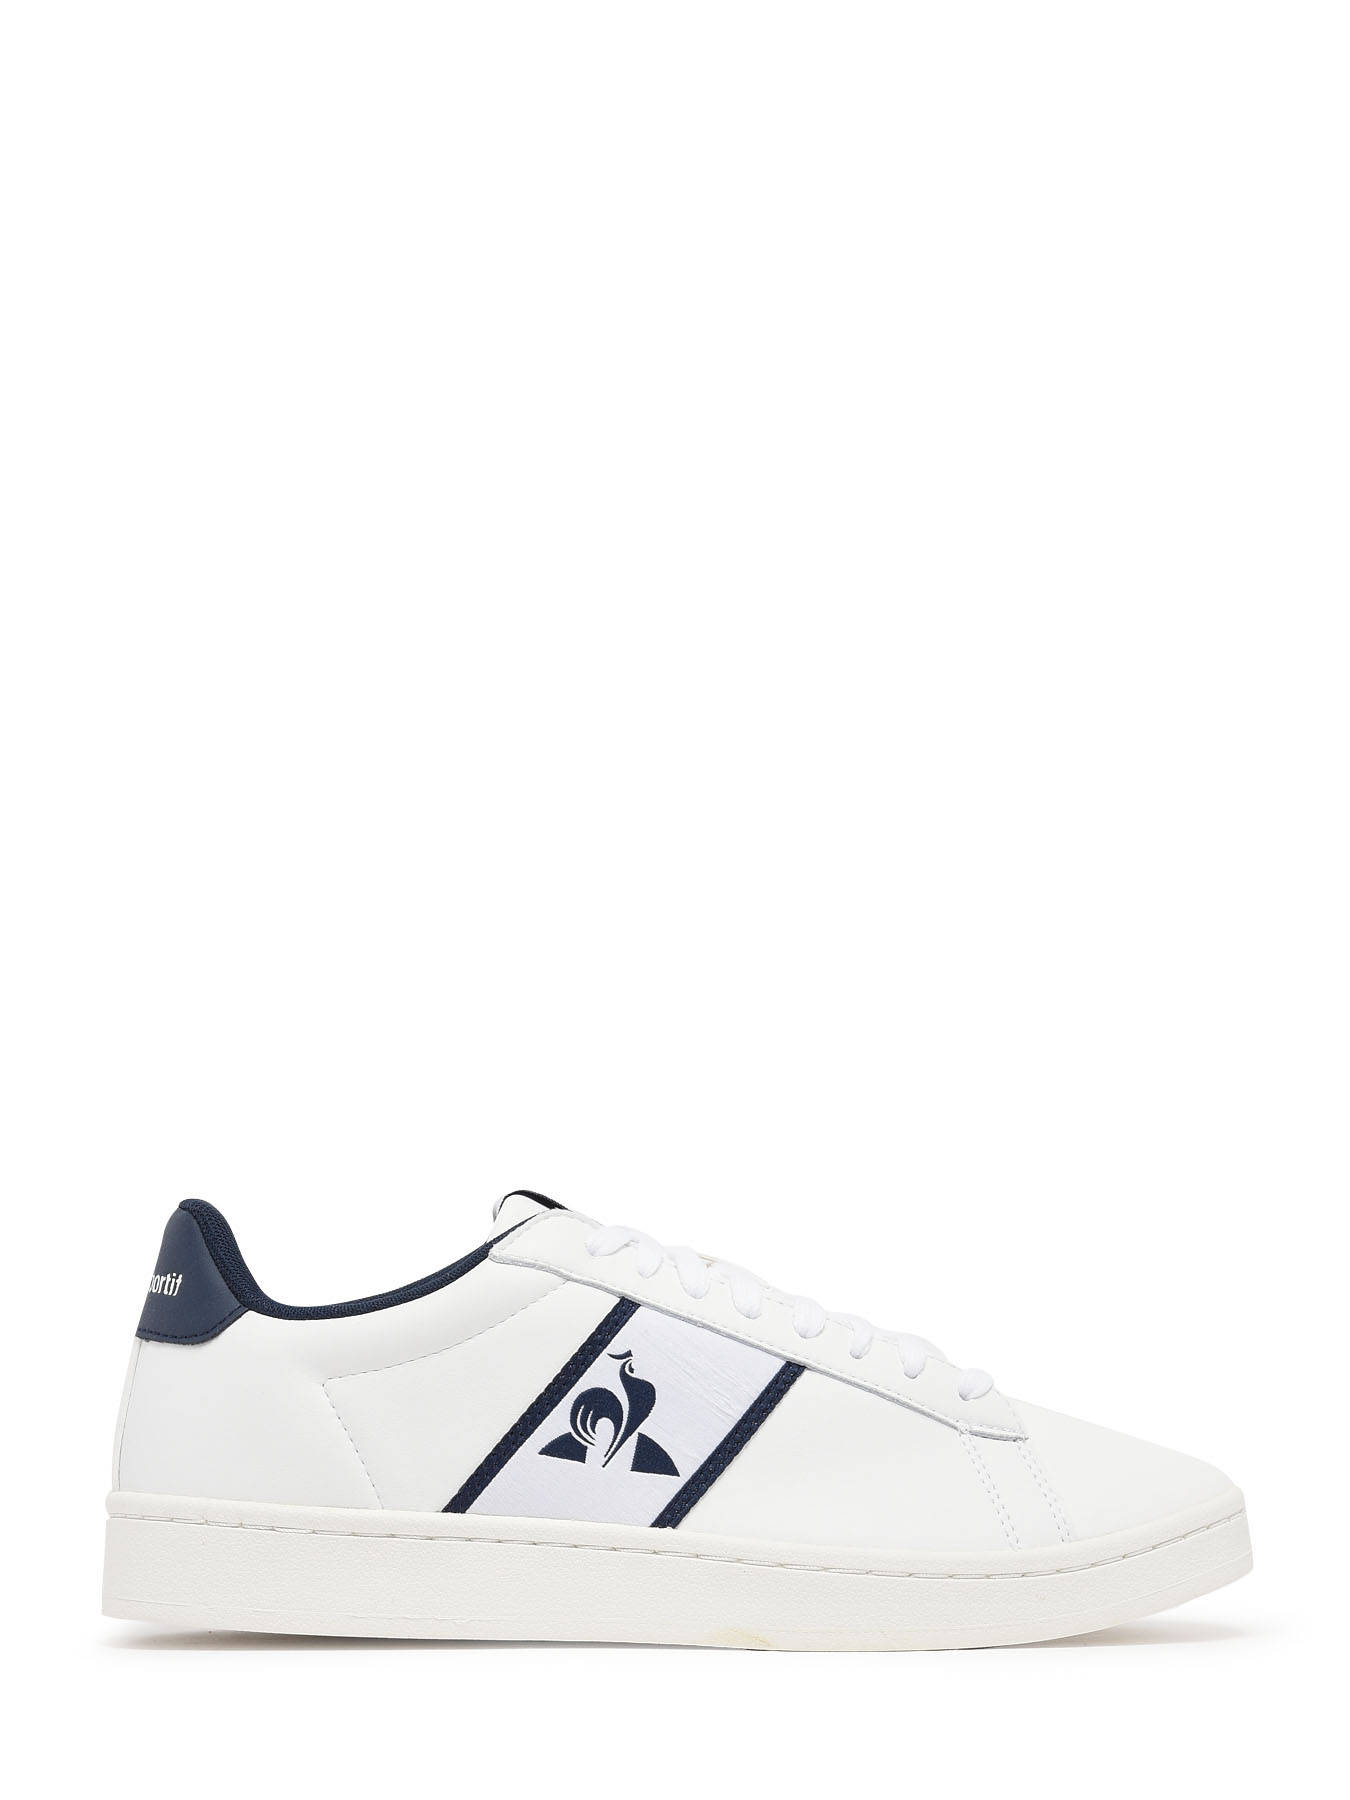 Le Coq Sportif Sneakers CLASSIC SOFT - best prices